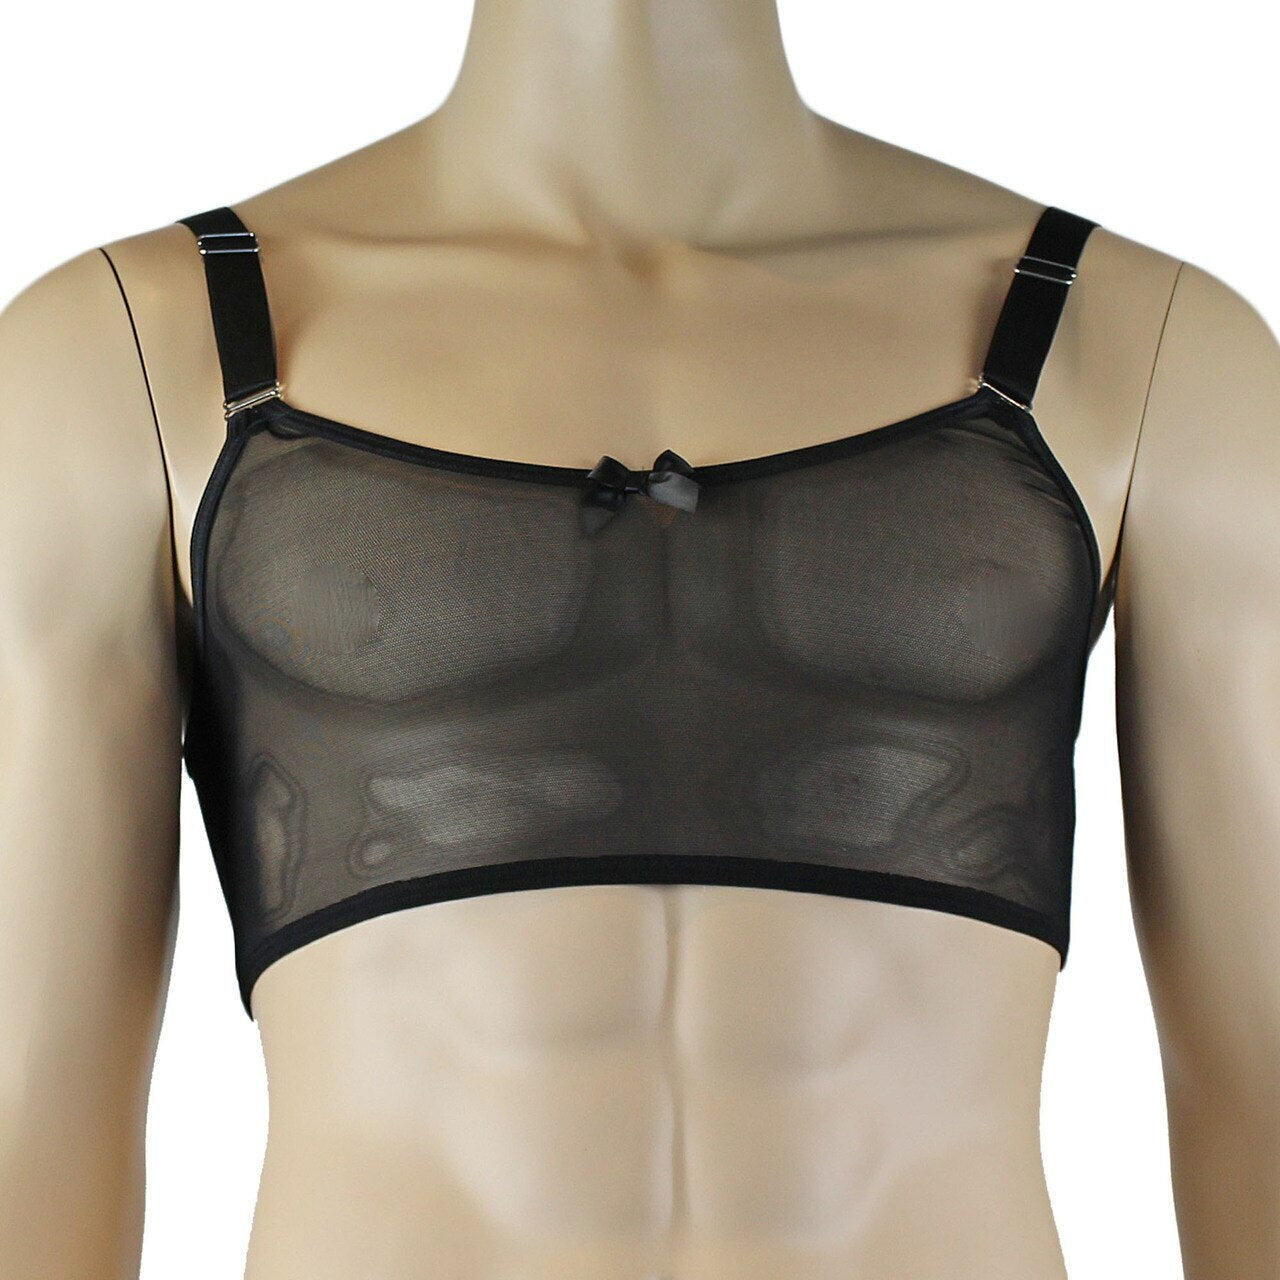 Mens Exotic Sheer Mesh Crop Bra Top Camisole, G string & Garterbelt - Sizes up to 3XL (black plus other colours)